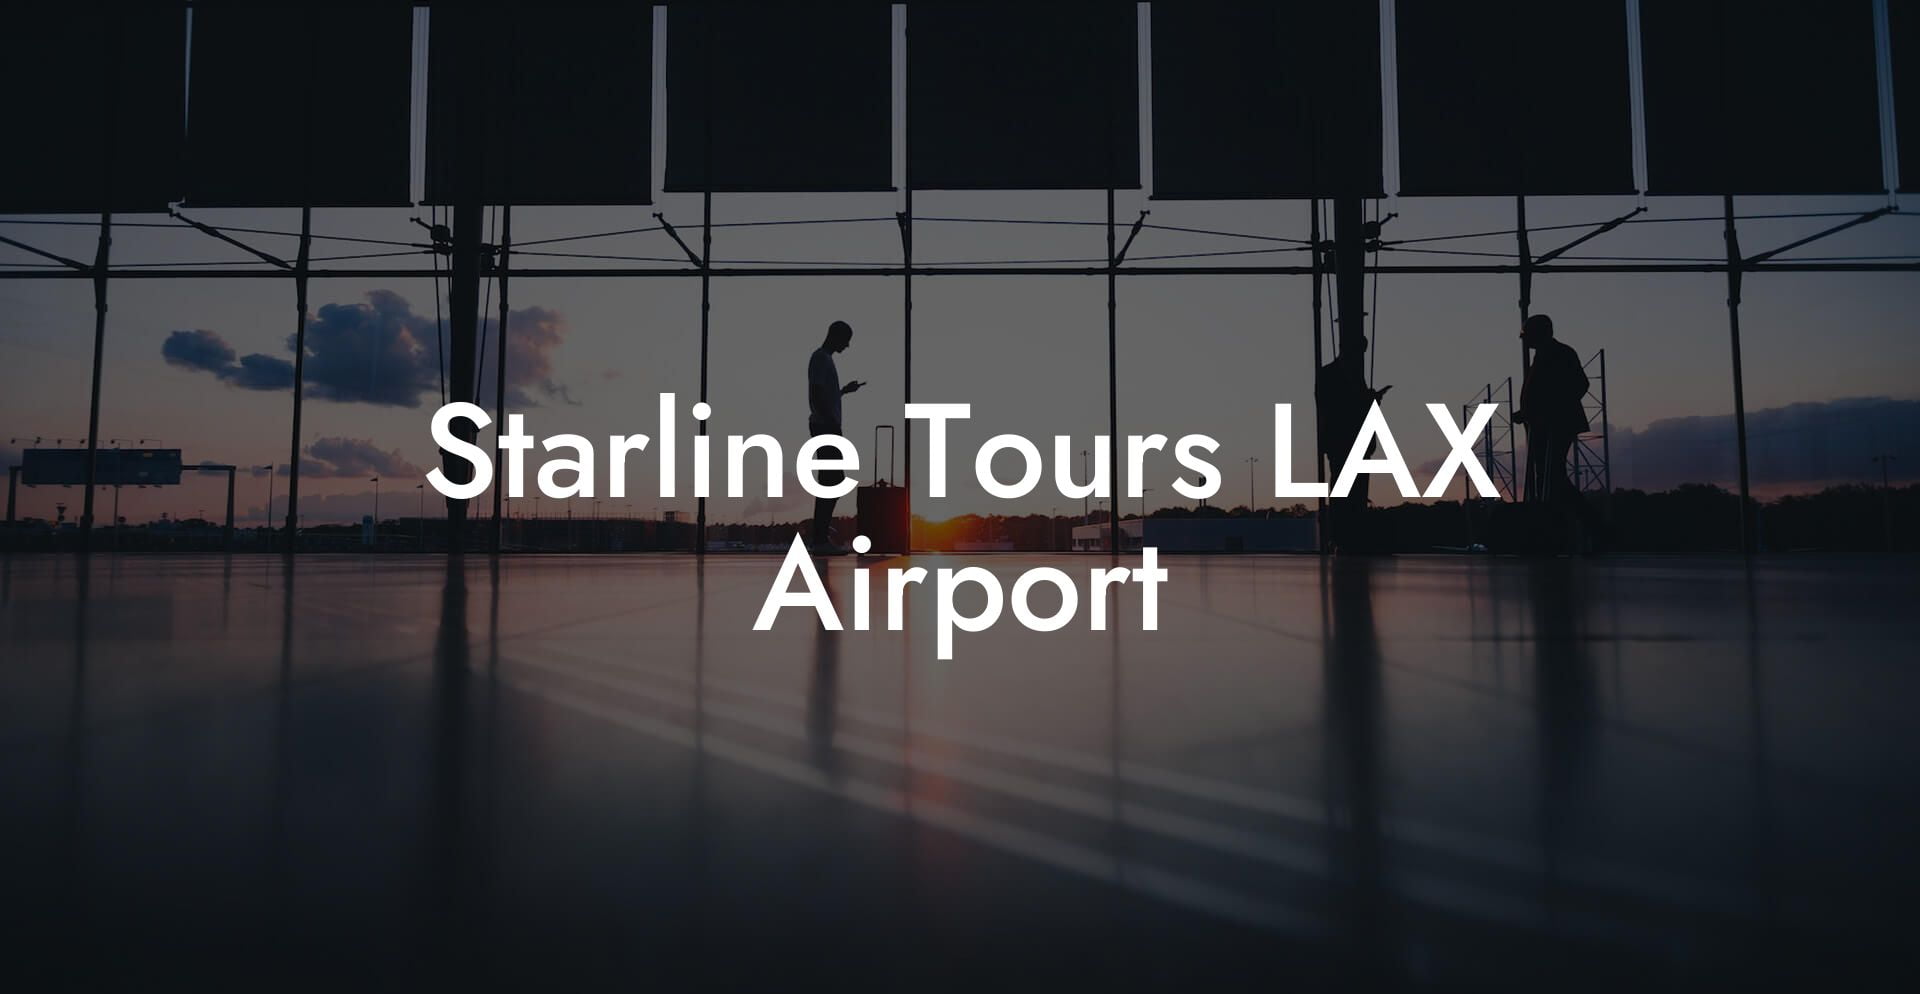 Starline Tours LAX Airport